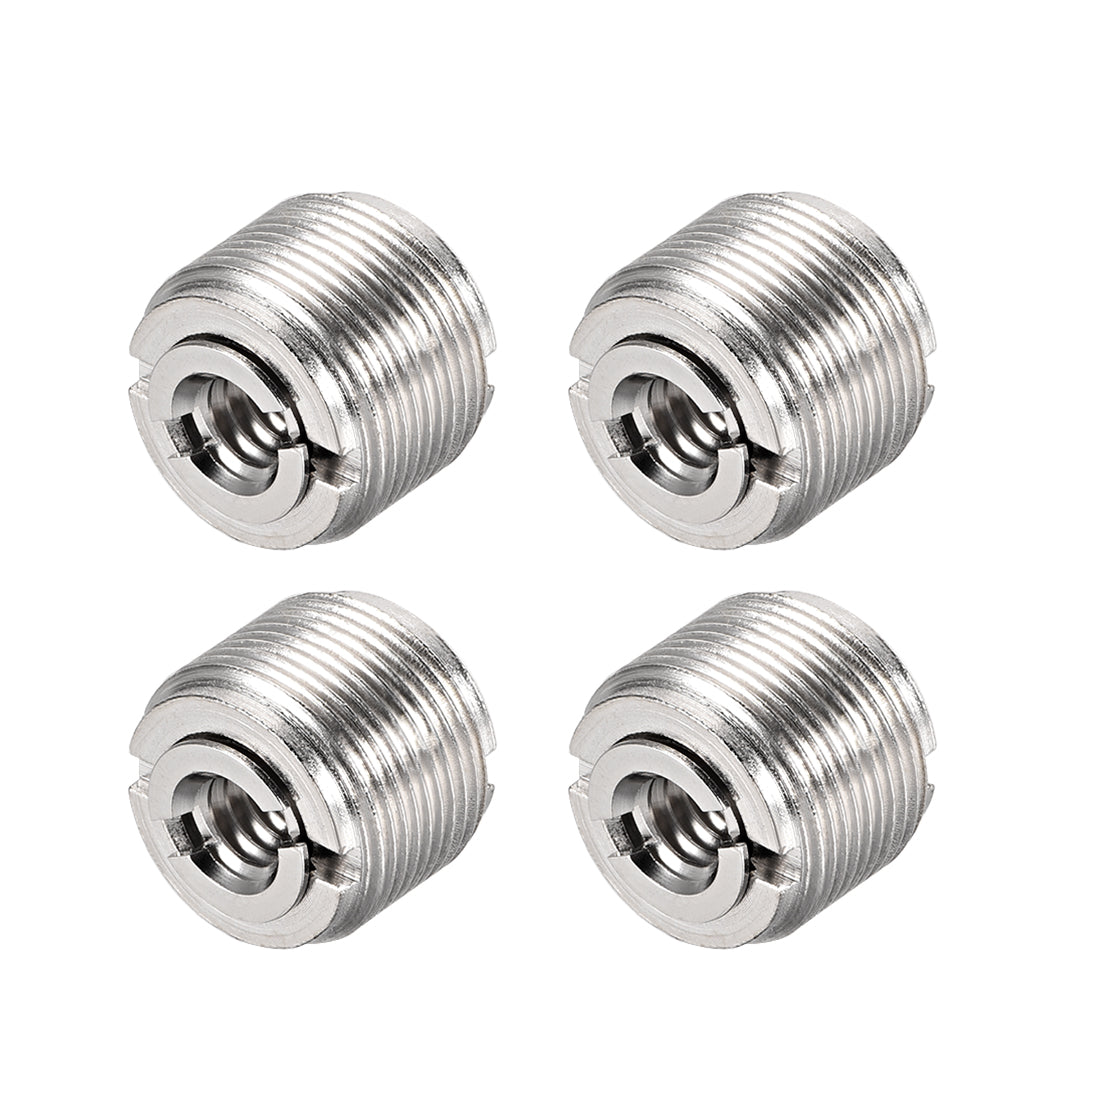 uxcell Uxcell 1/4” Female To 5/8" Male Threaded Screw Adapter For Microphone Tripod Stand 4pcs